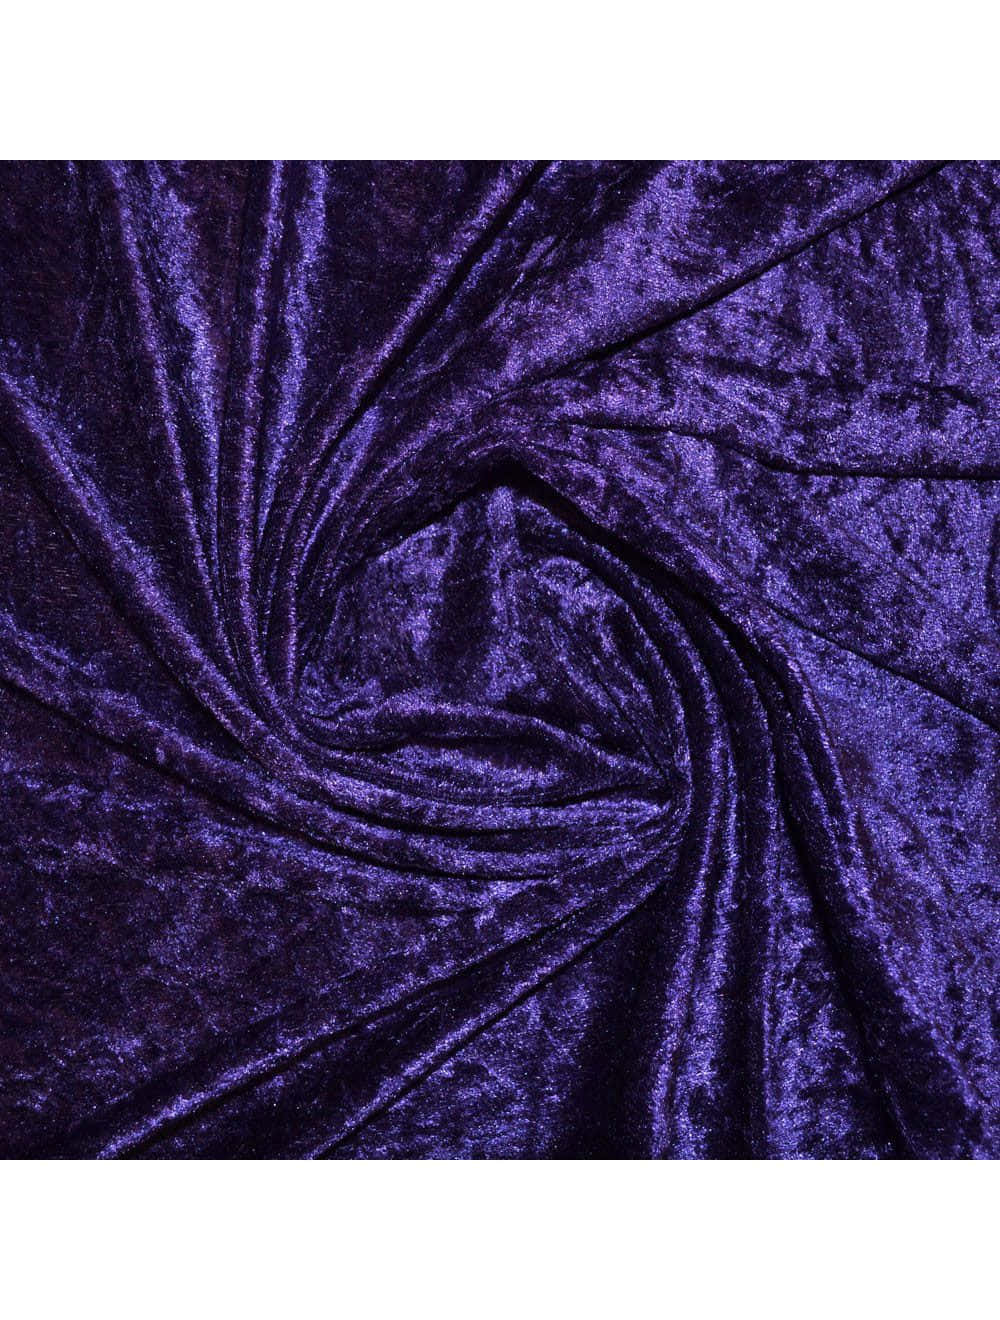 A luxuriously soft and plush purple velvet fabric. Wallpaper